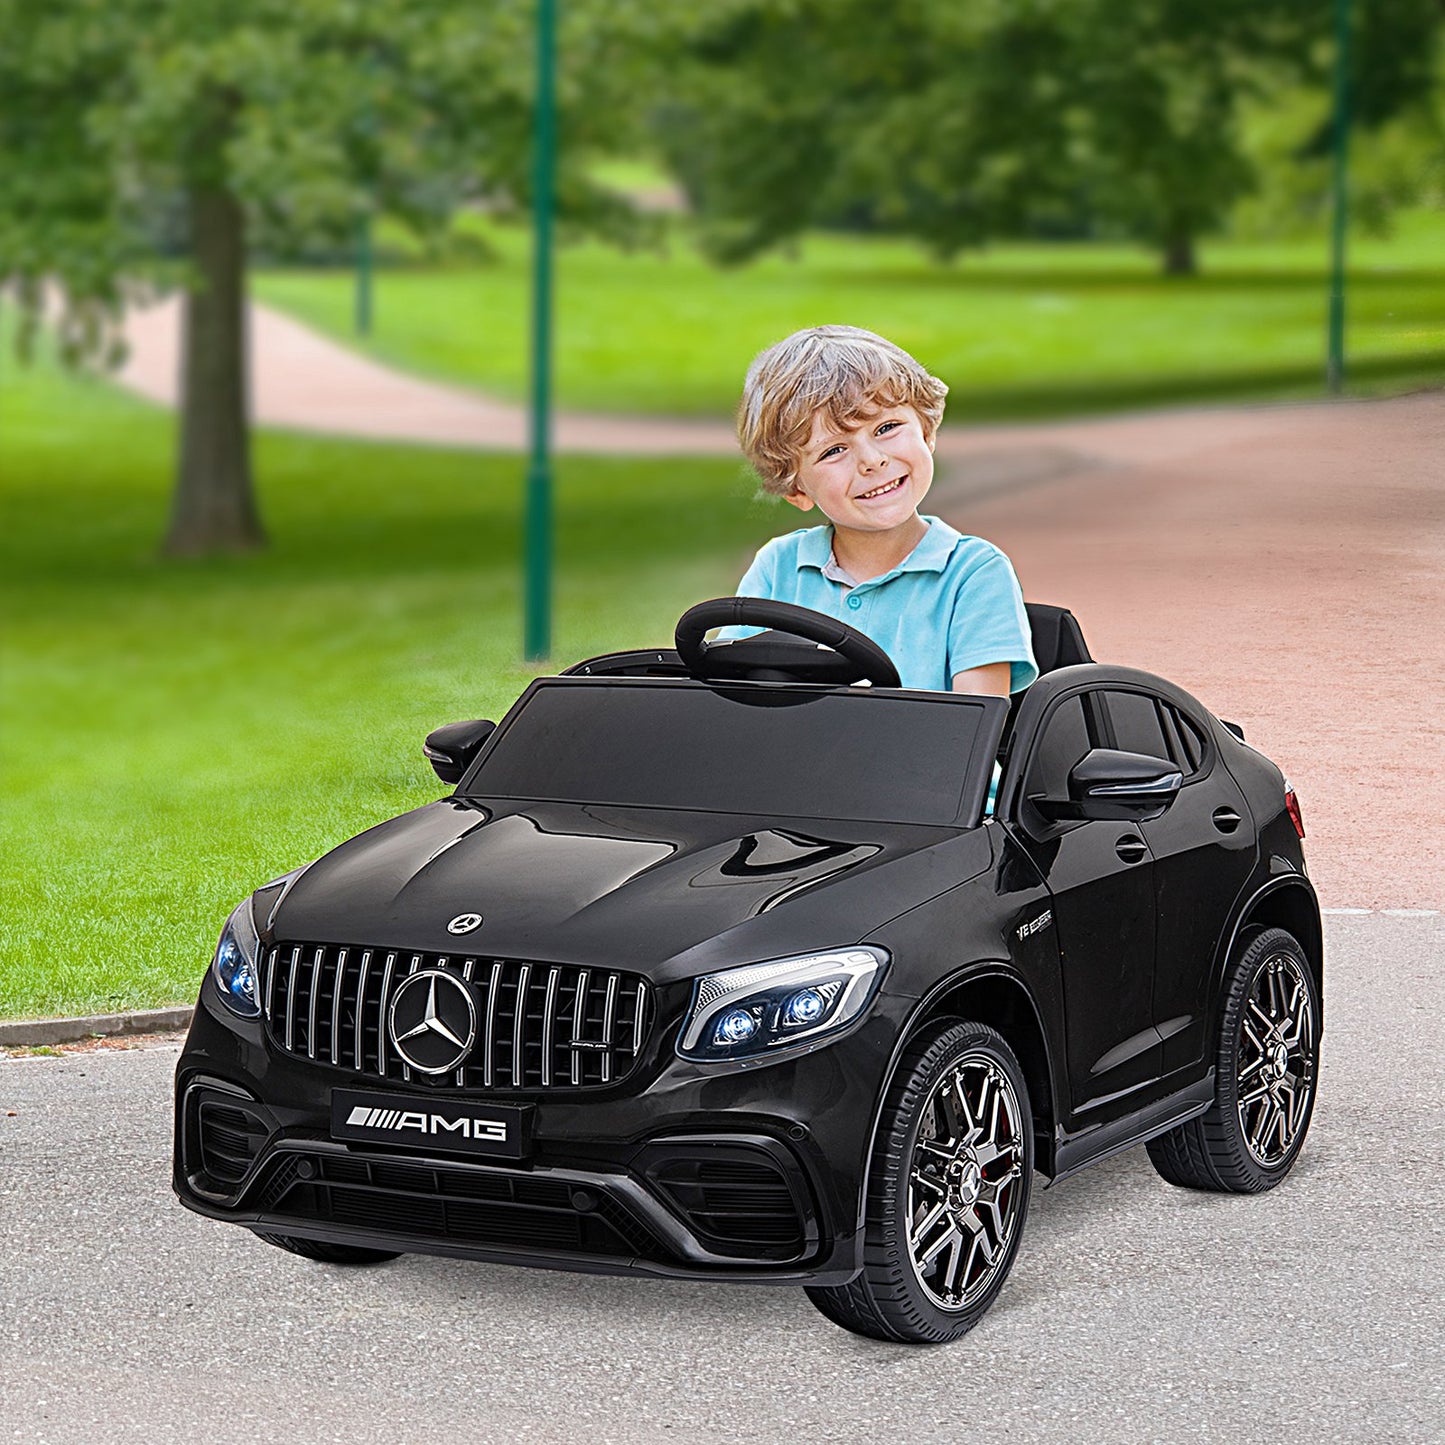 Aosom 12V Ride On Toy Car for Kids with Remote Control, Mercedes Benz